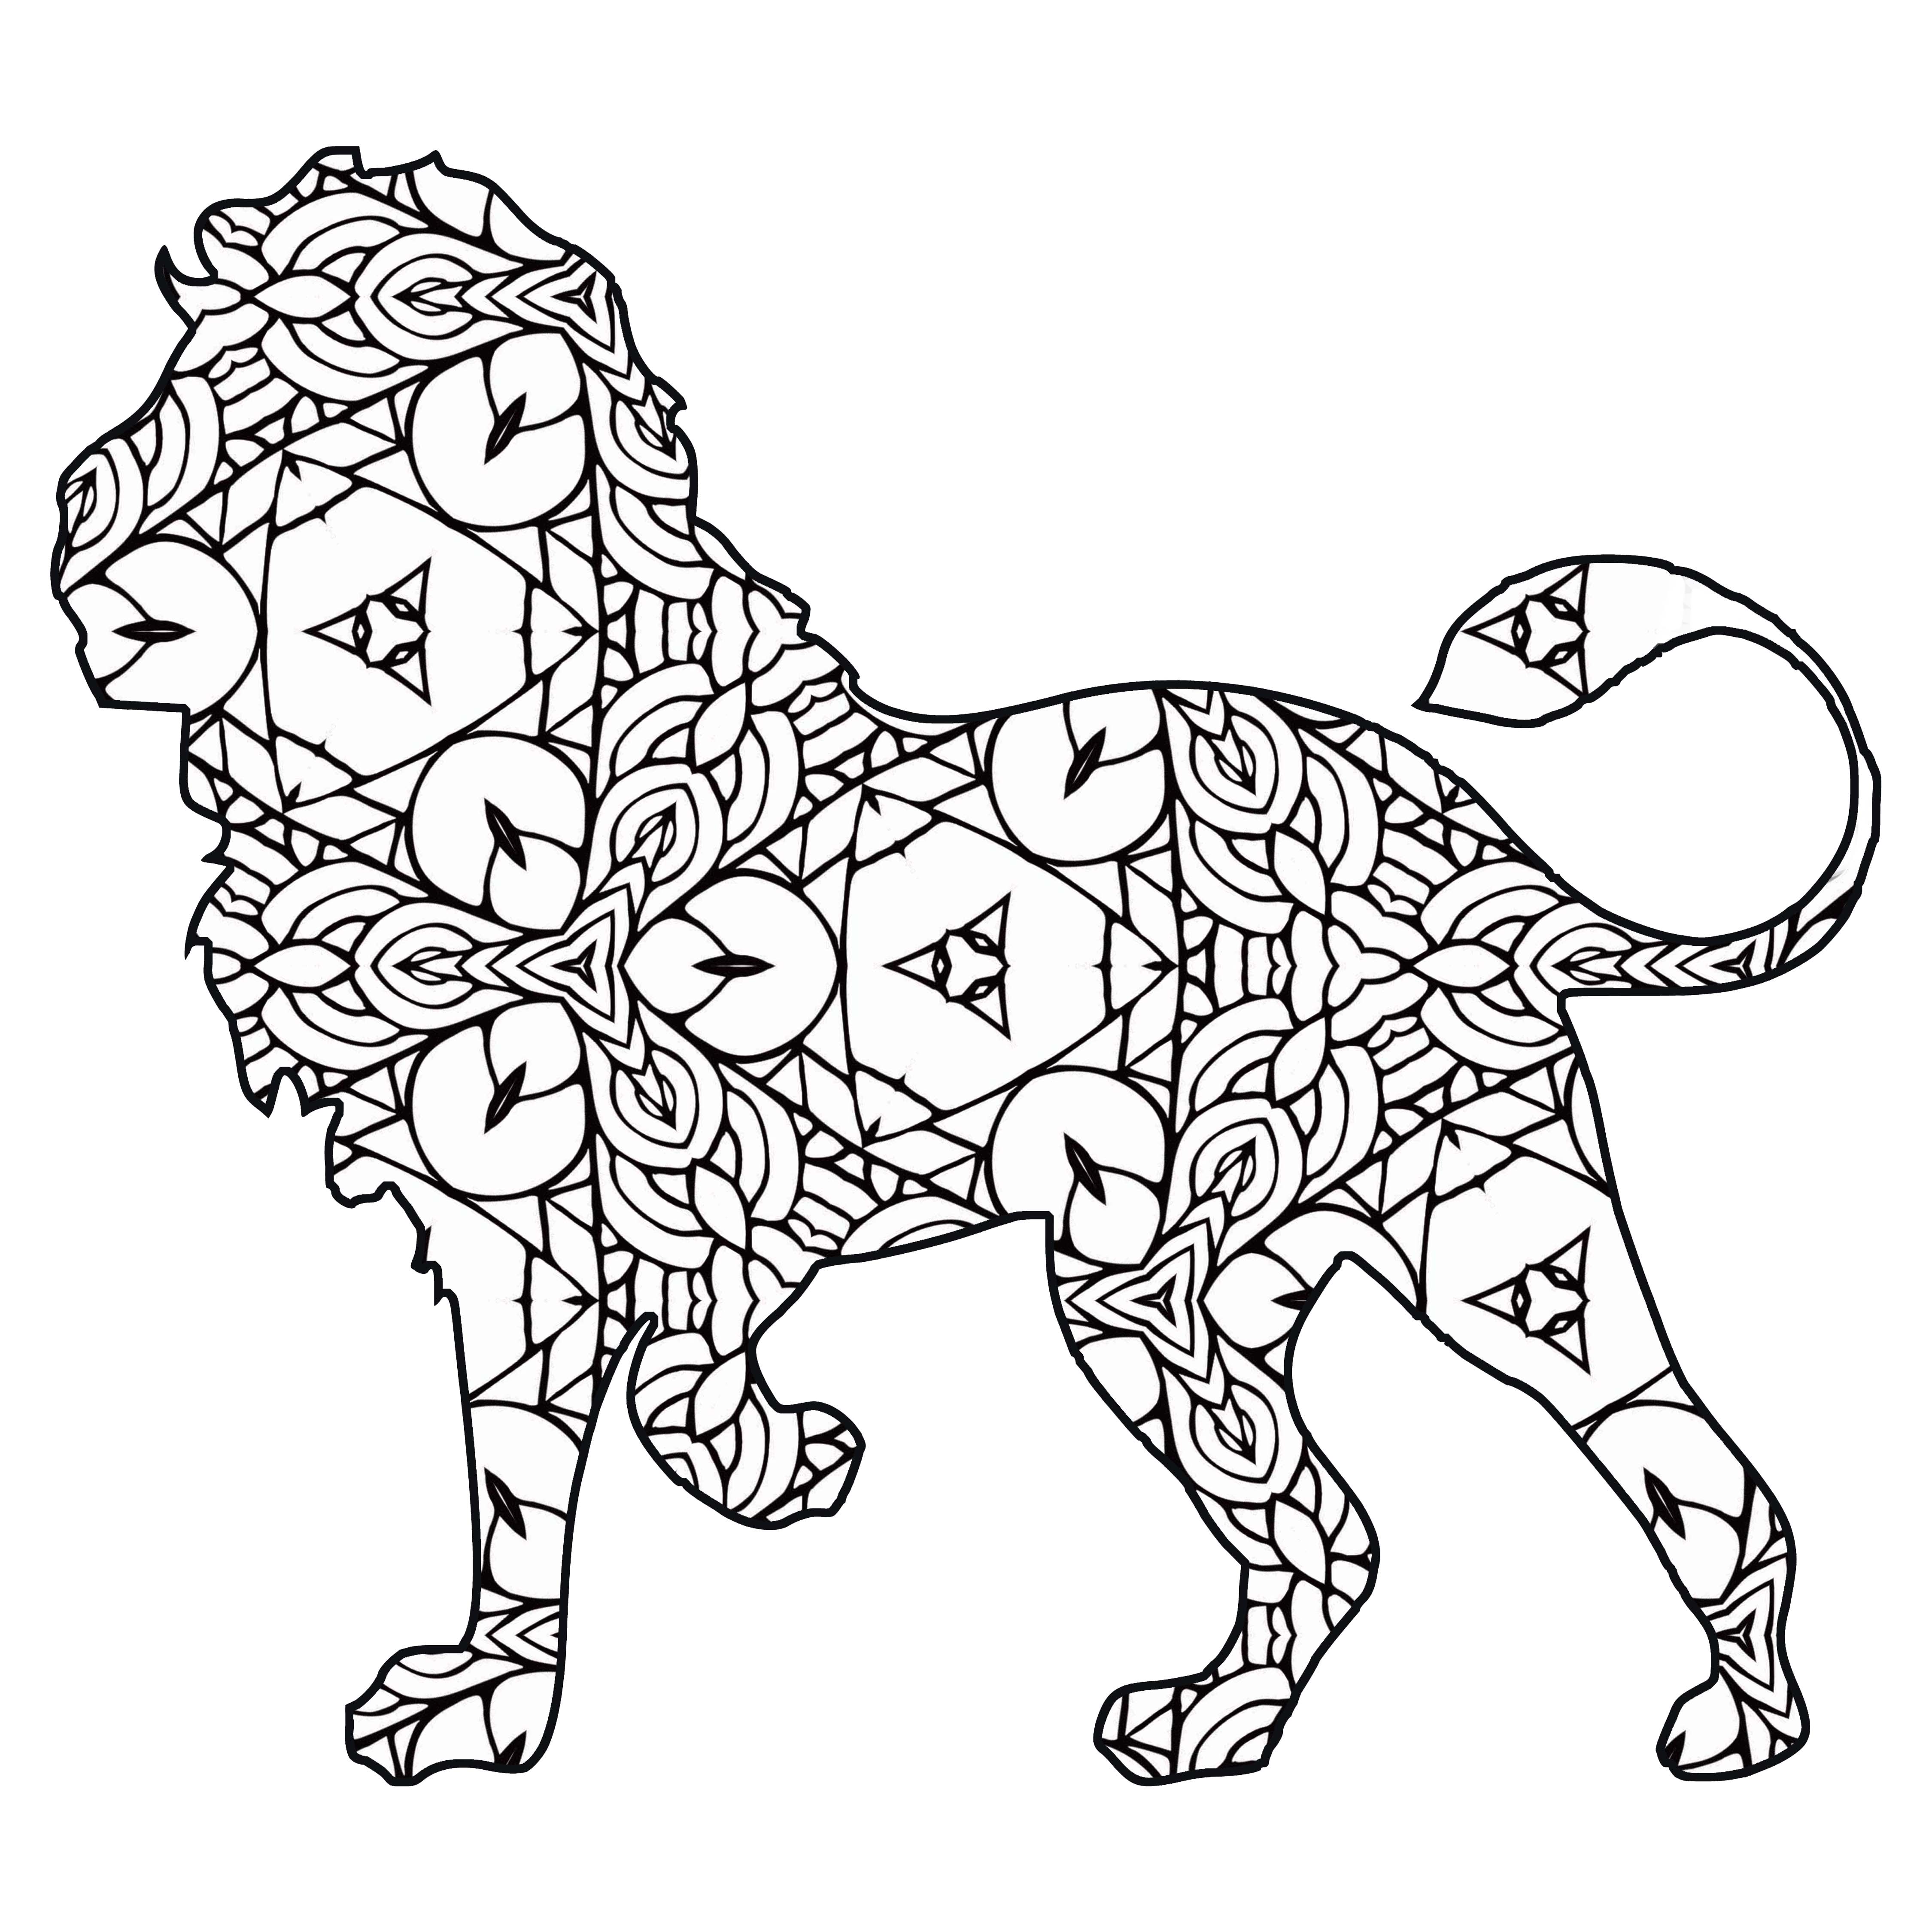 Free printable geometric animal coloring pages the cottage market